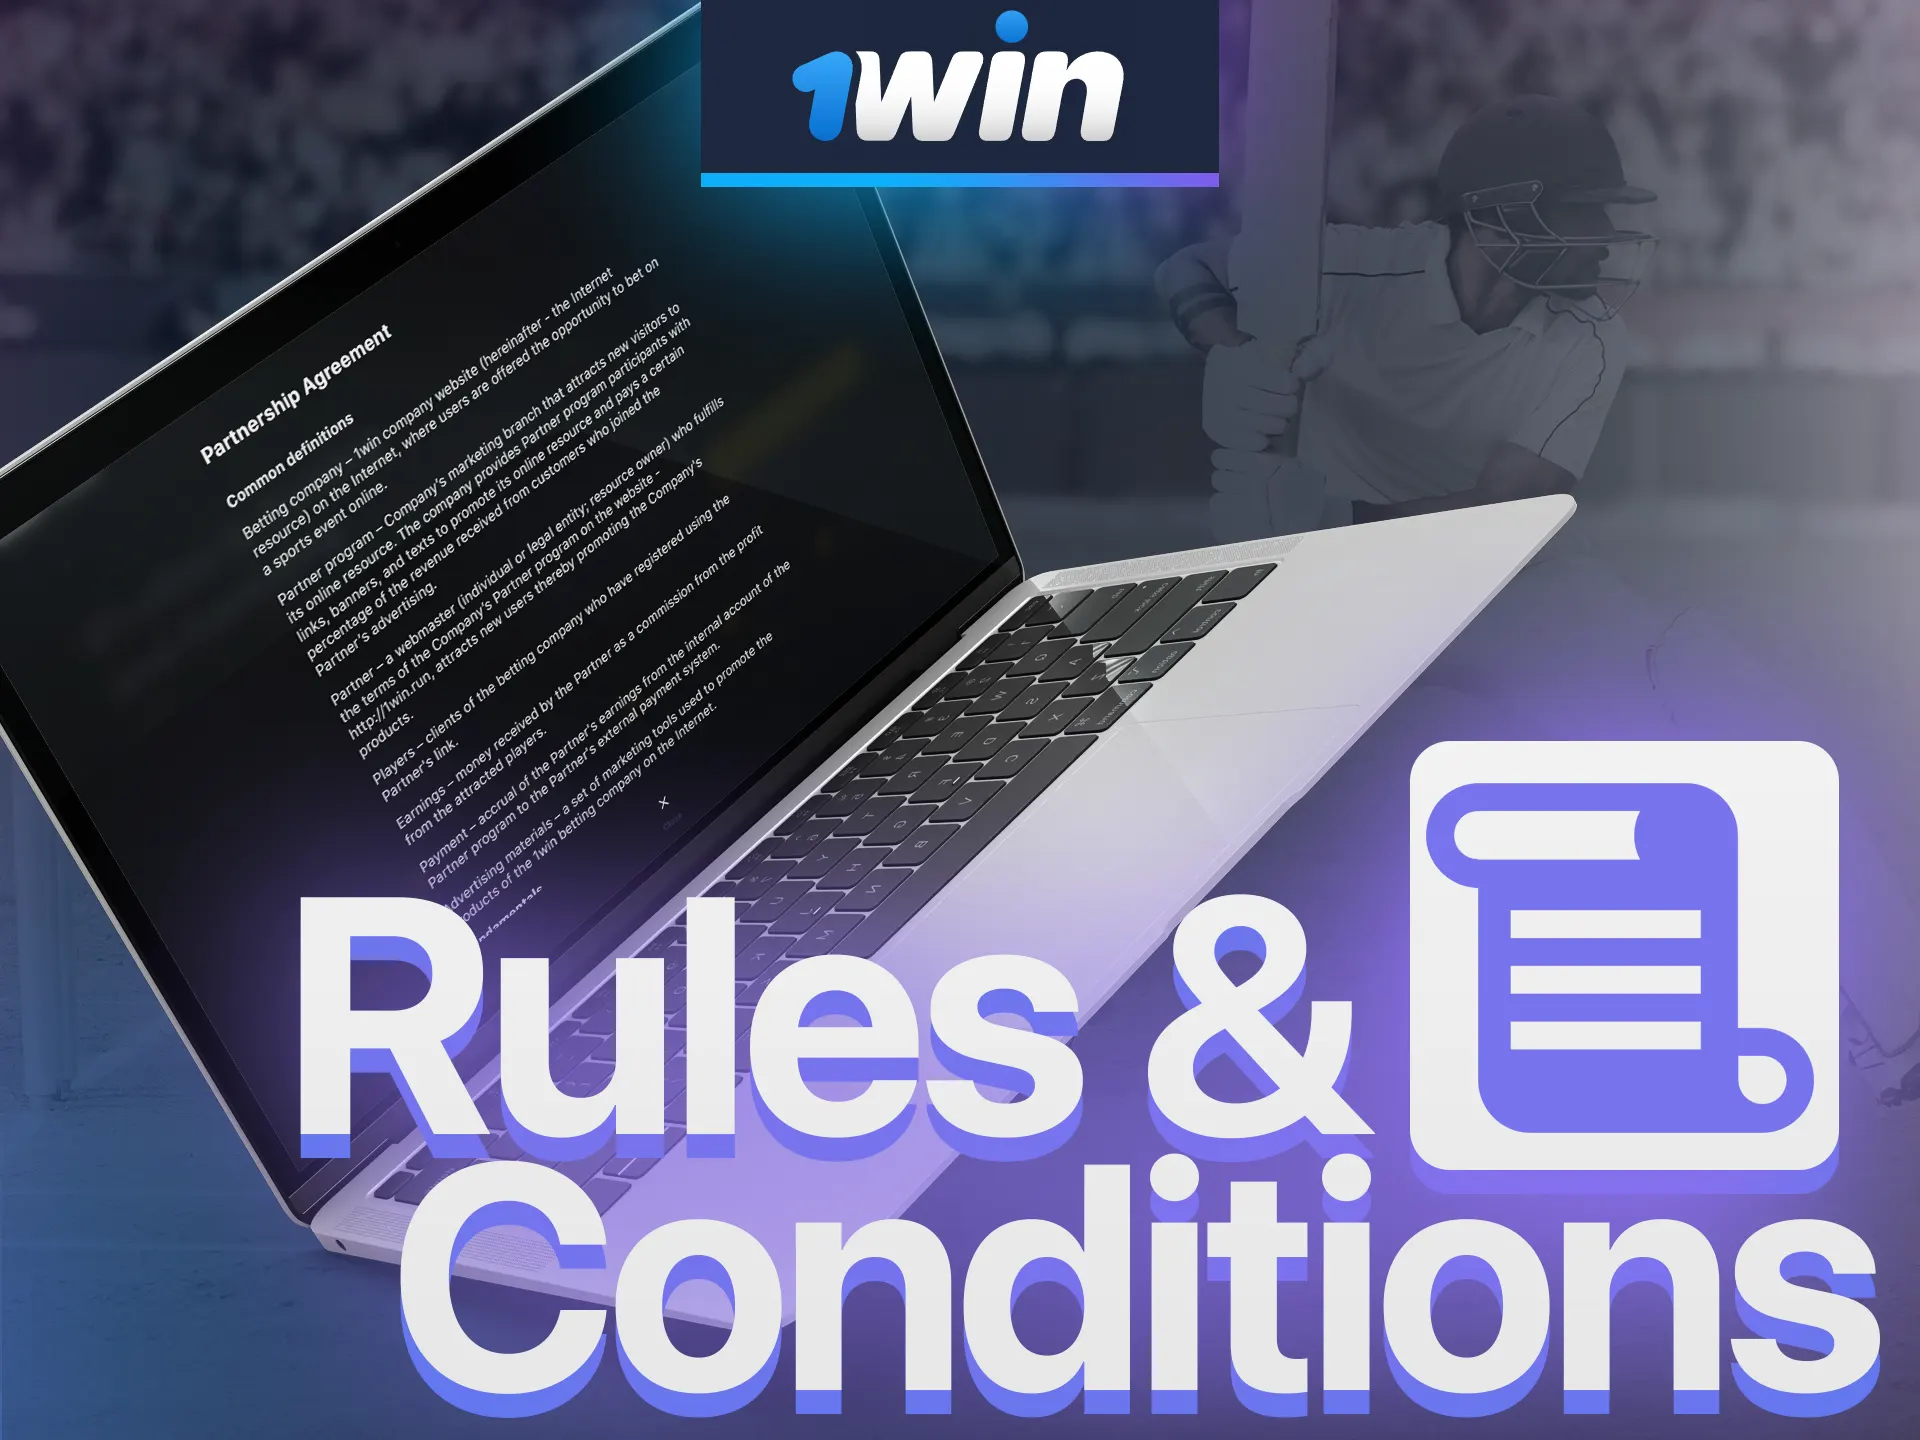 Learn the basic rules of the 1Win affiliate program.